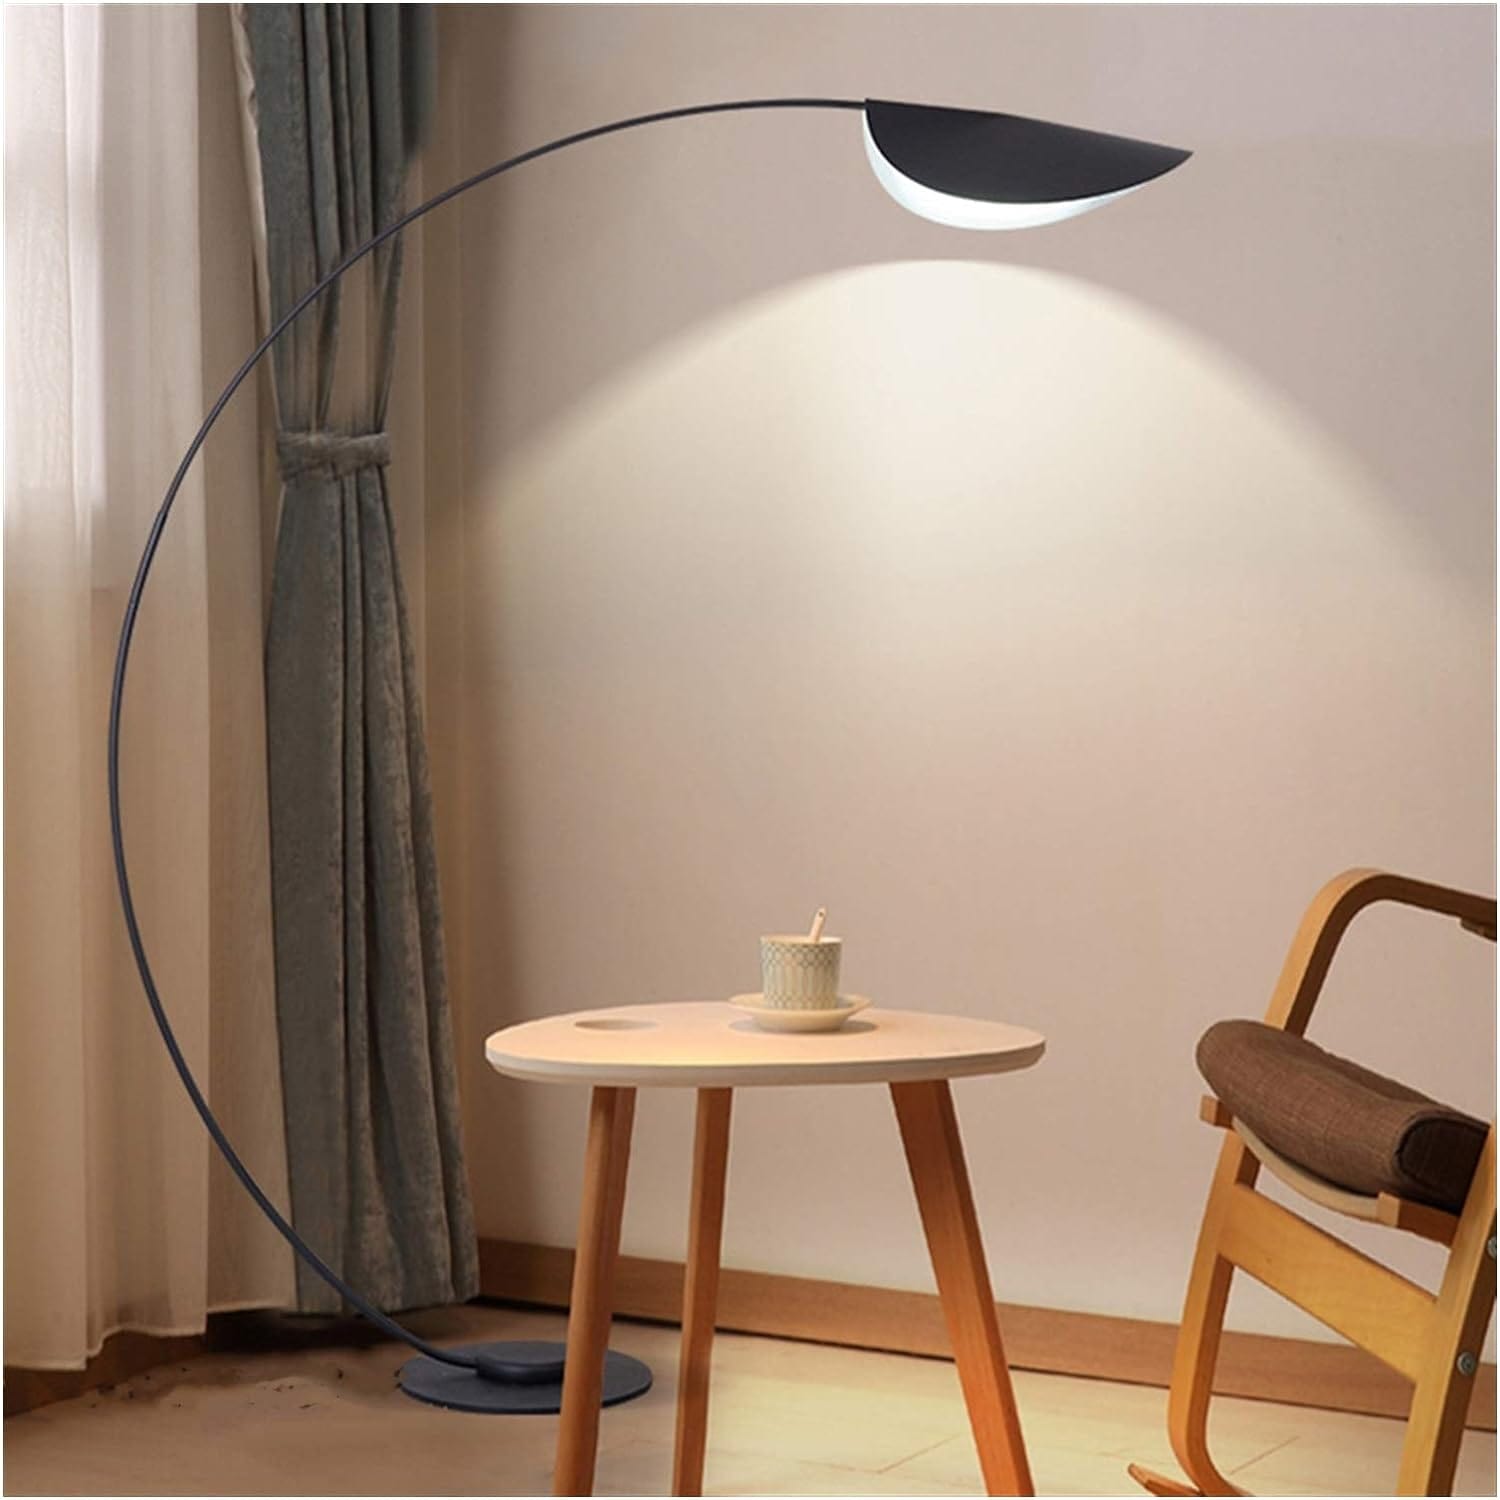 Buy Modern Floor Standing Lamp Light - A49 | Shop at Supply Master Accra, Ghana Lamps & Lightings Buy Tools hardware Building materials